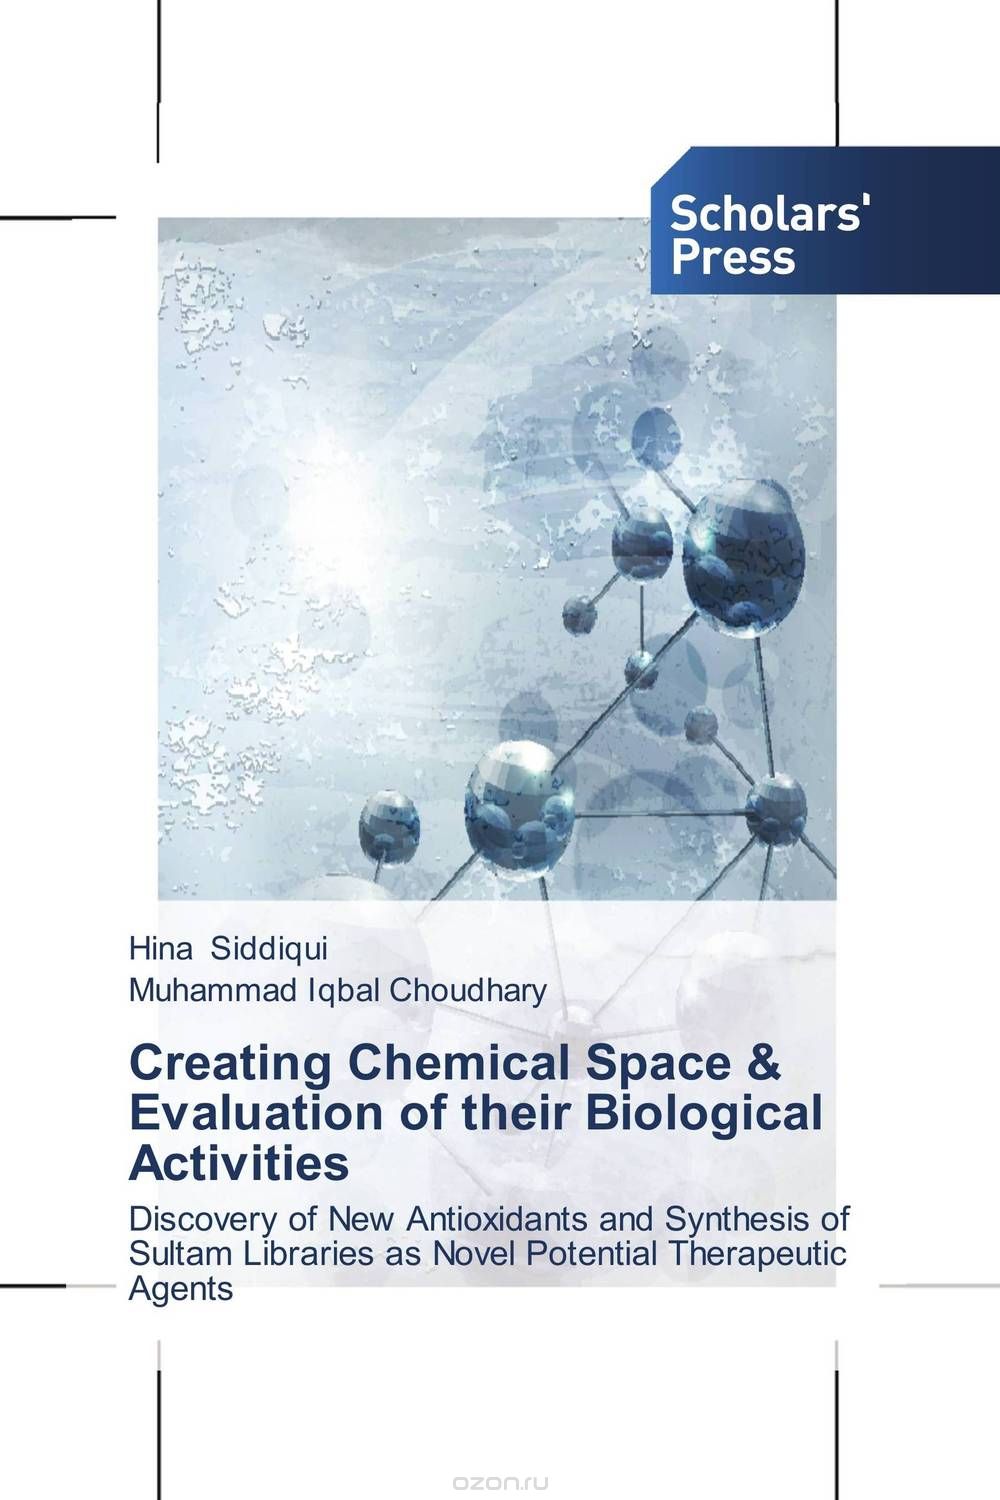 Creating Chemical Space & Evaluation of their Biological Activities